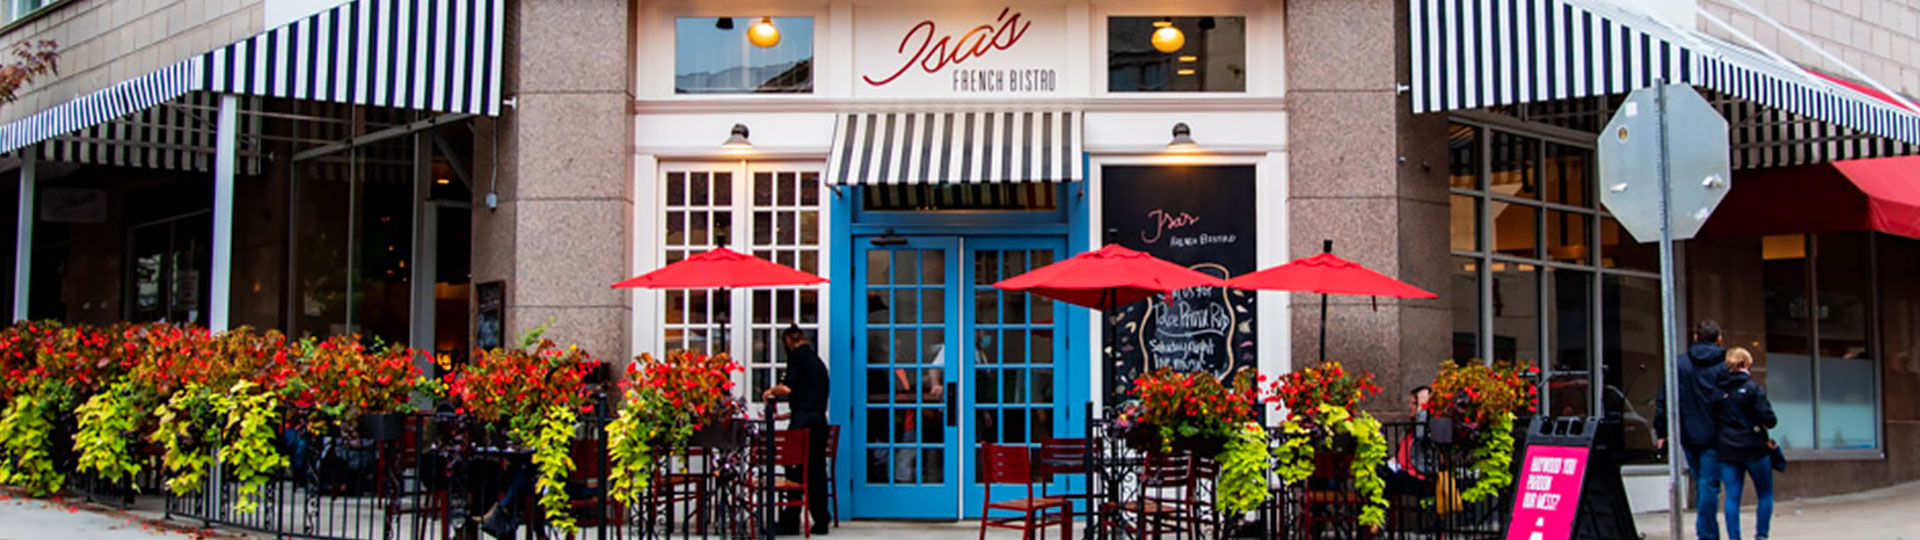 Isa's French Bistro Restaurant, Asheville 404-Page Not Found